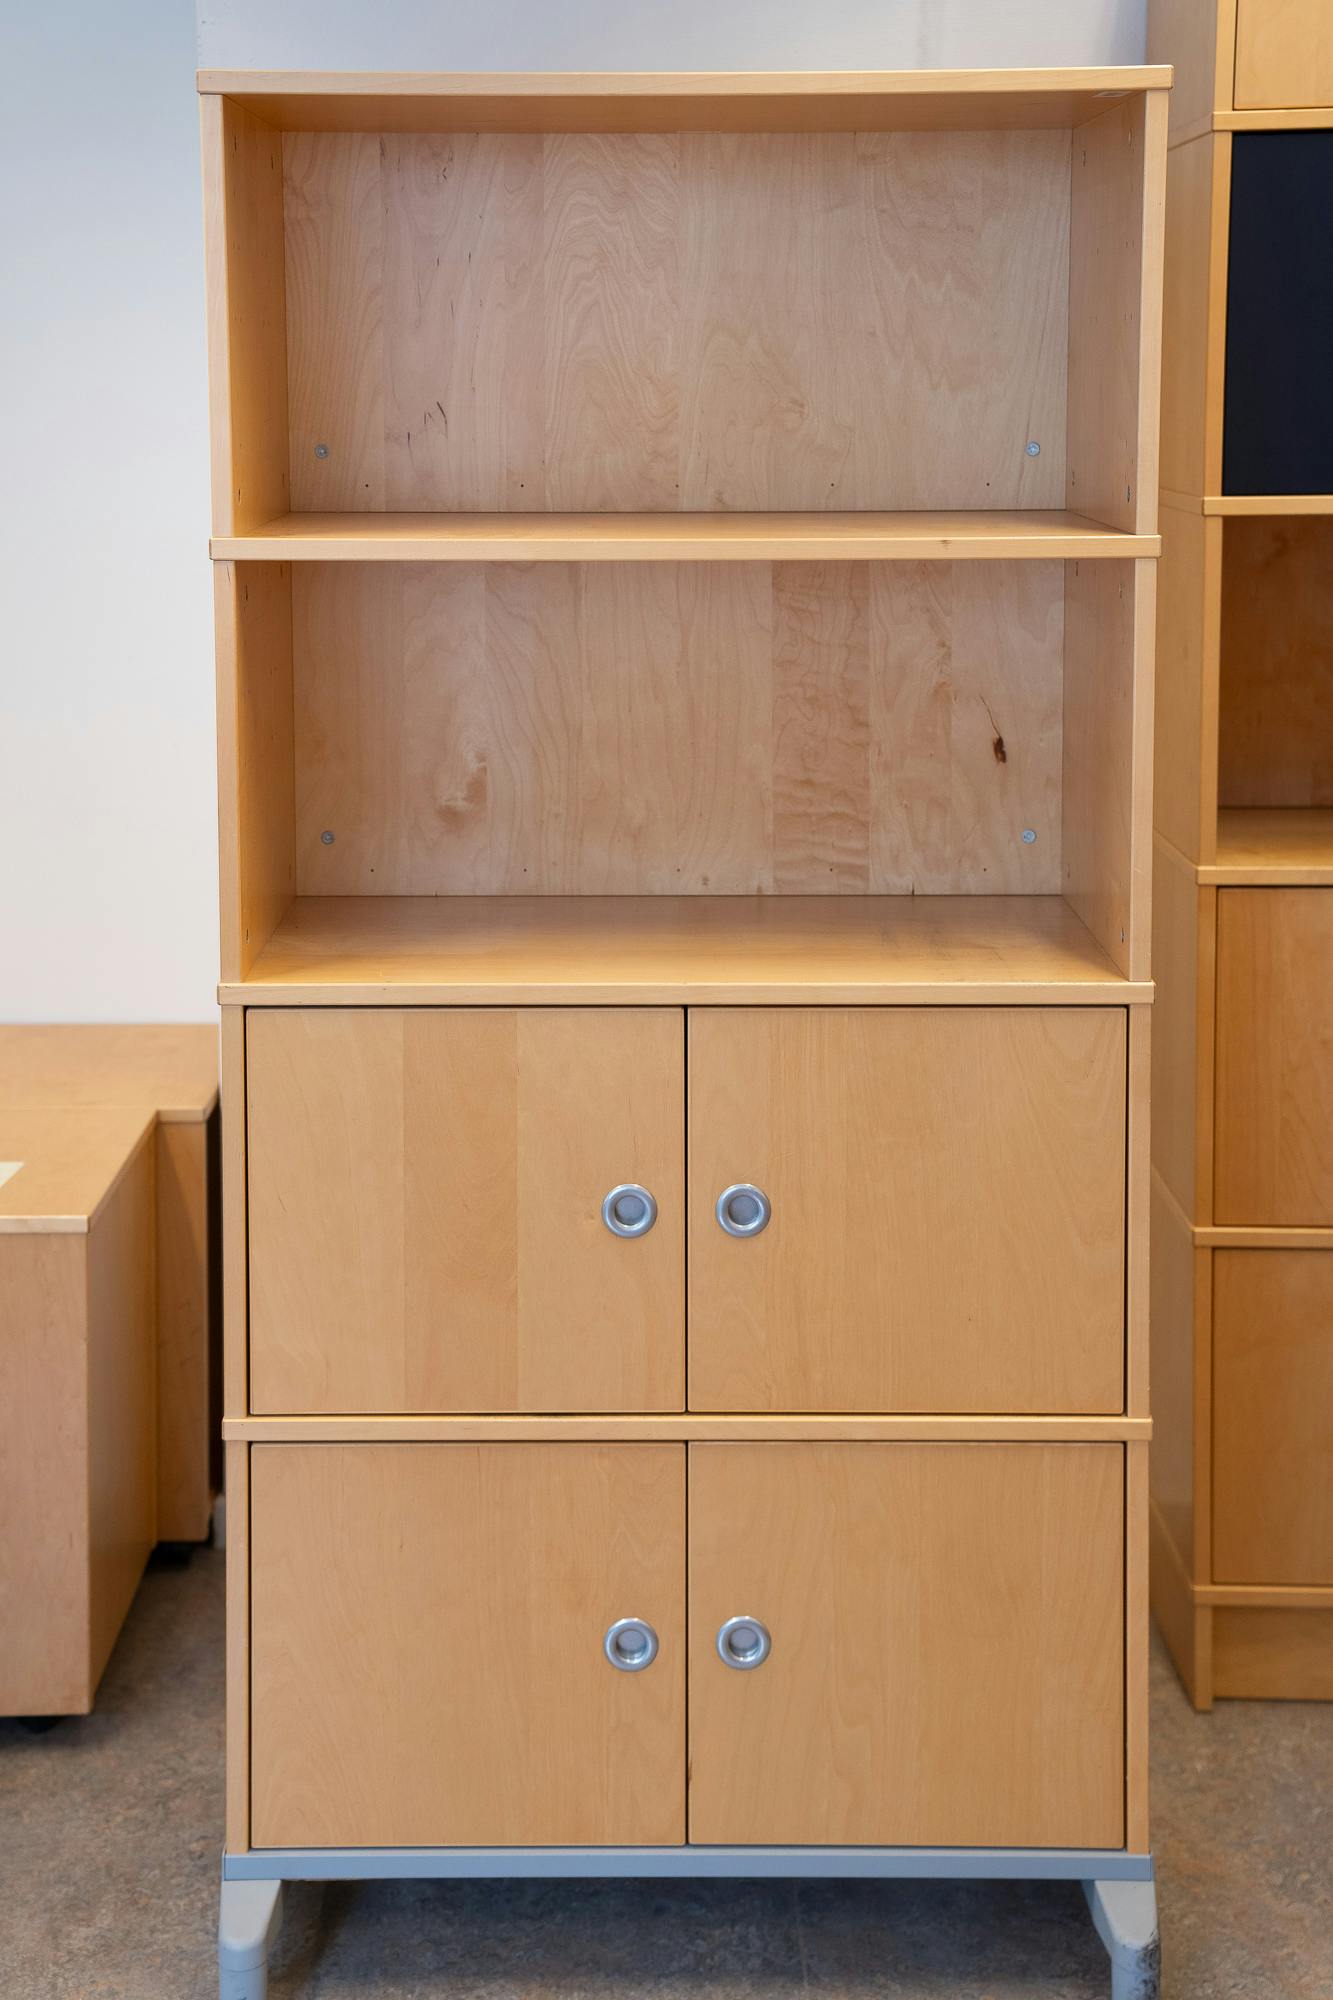 ikea wooden storage cabinet with metal legs - Second hand quality "Storage" - Relieve Furniture